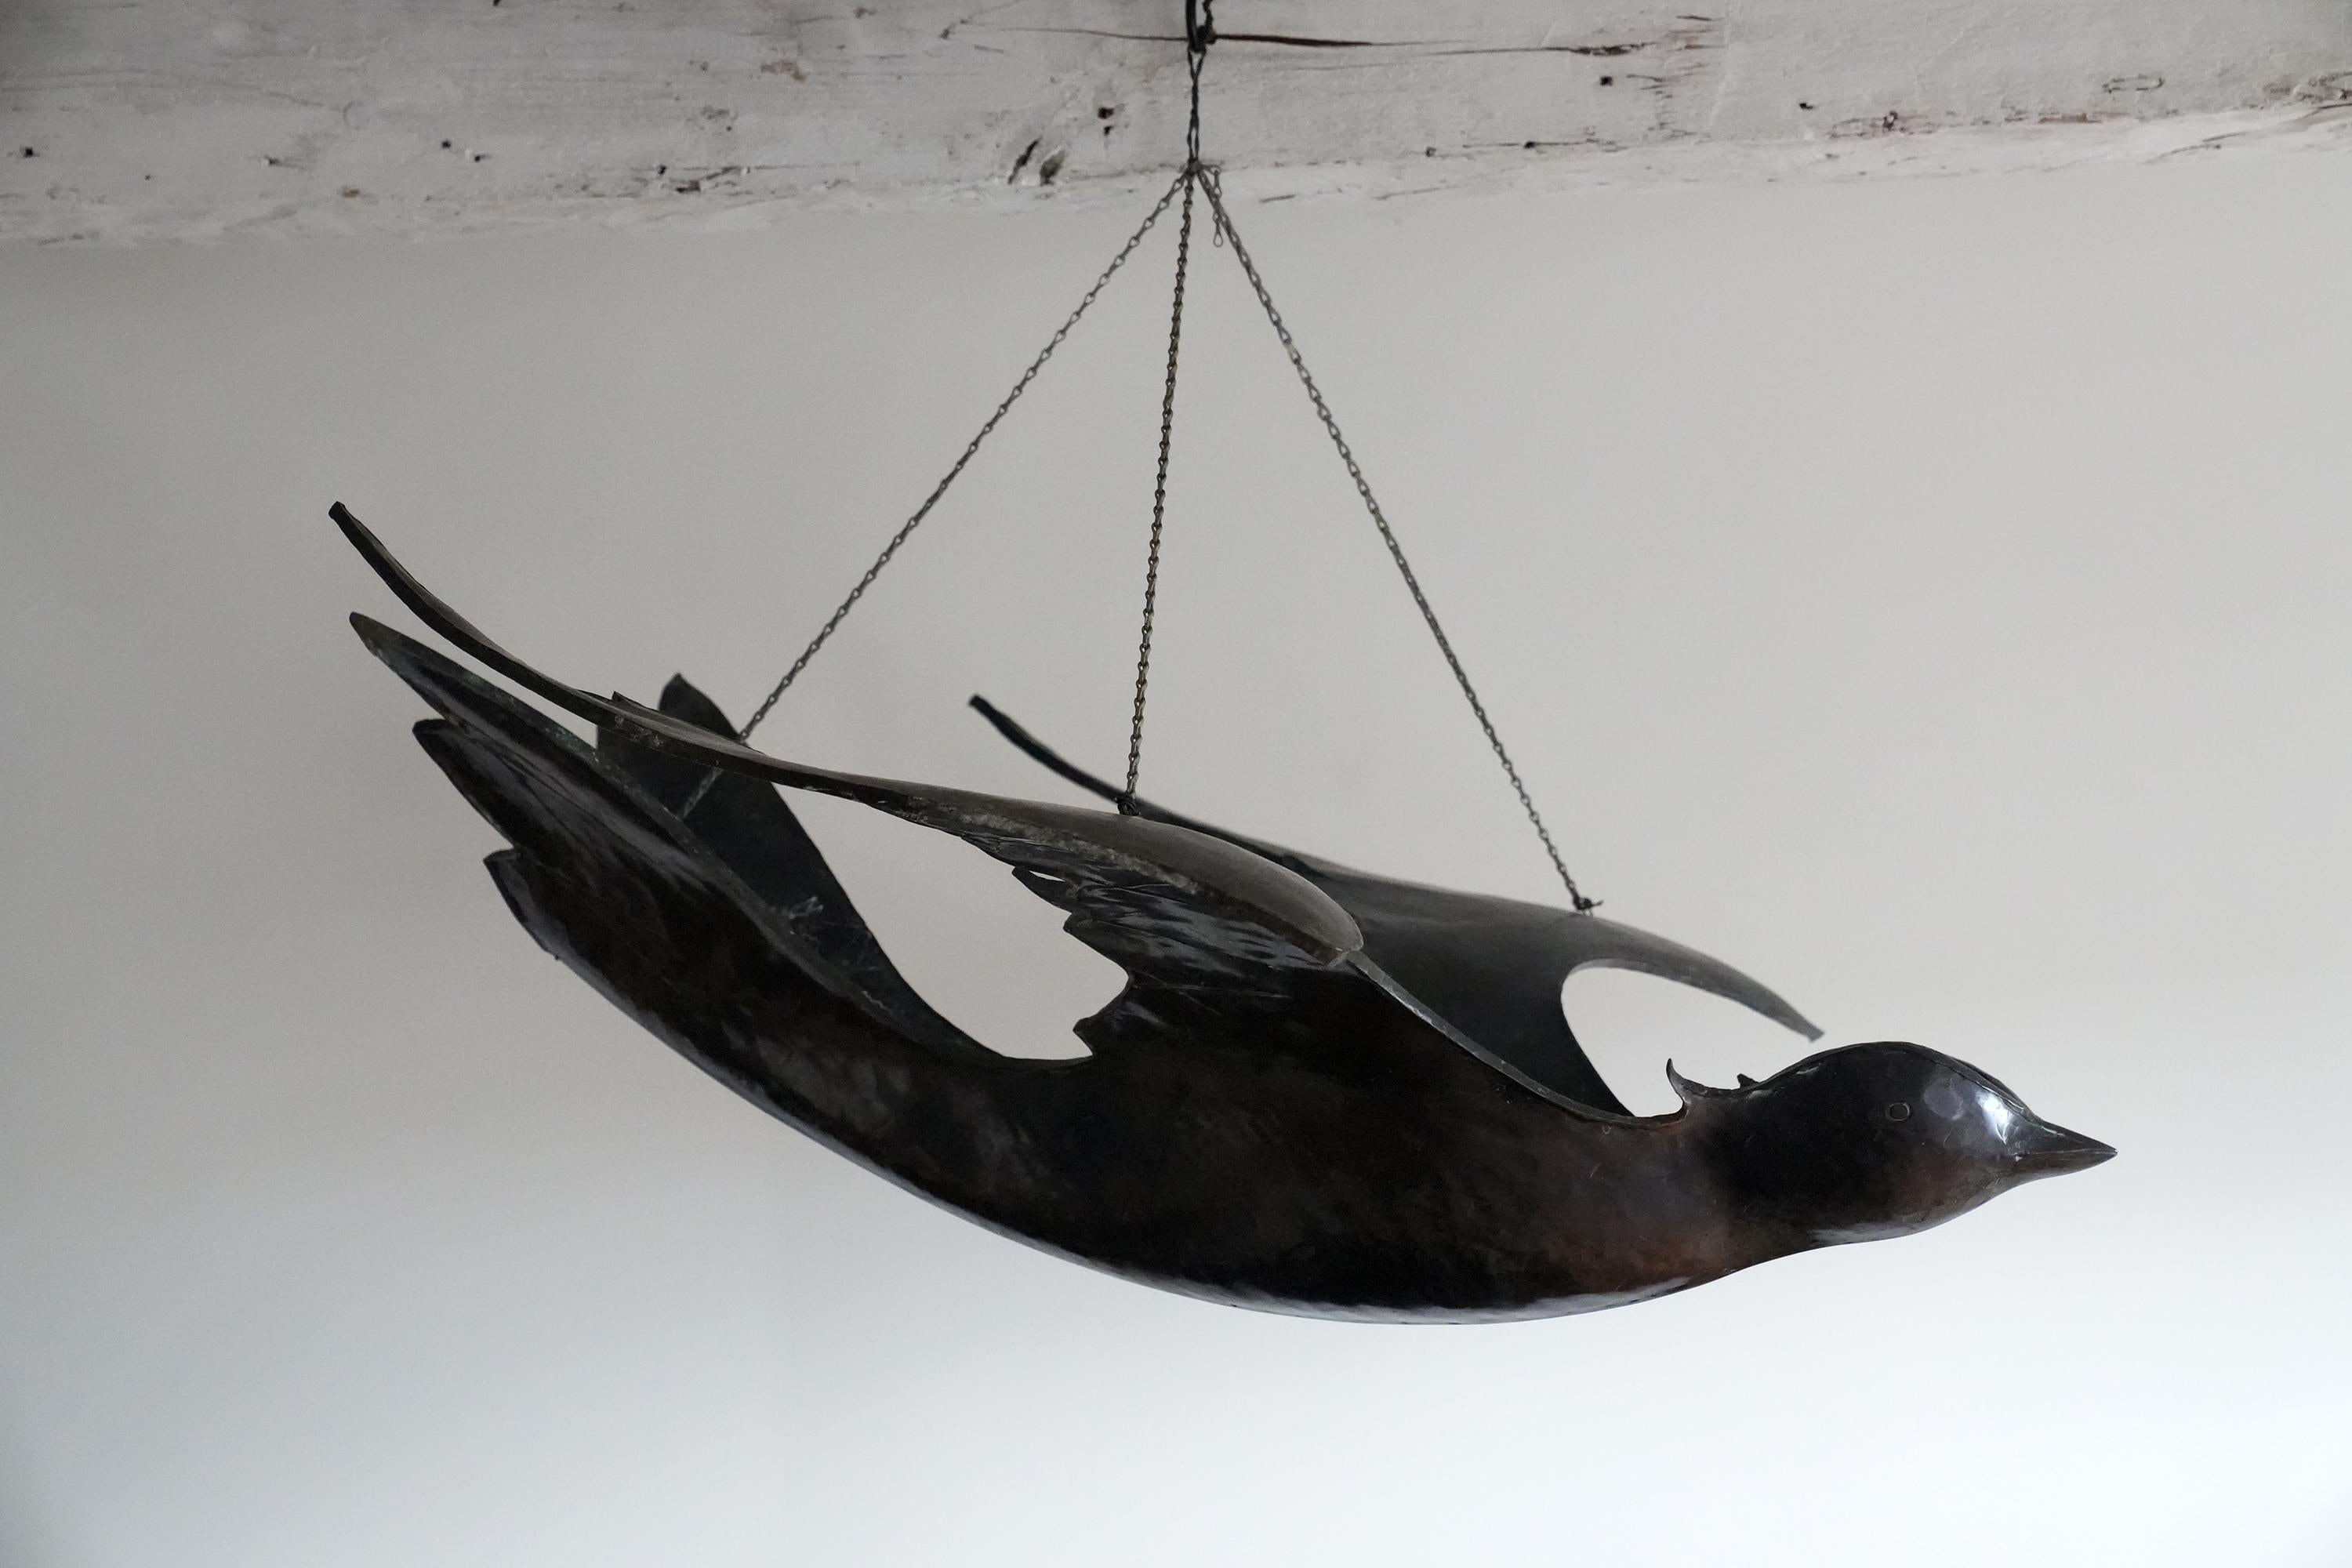 This is a one of a kind hand hammered and sculpted modernist bronze bird reminiscent of Lalanne. The body of the bird is lightly hammered with the suggestion of feathers incised on the wings and tail with a light patina throughout. Monumental in